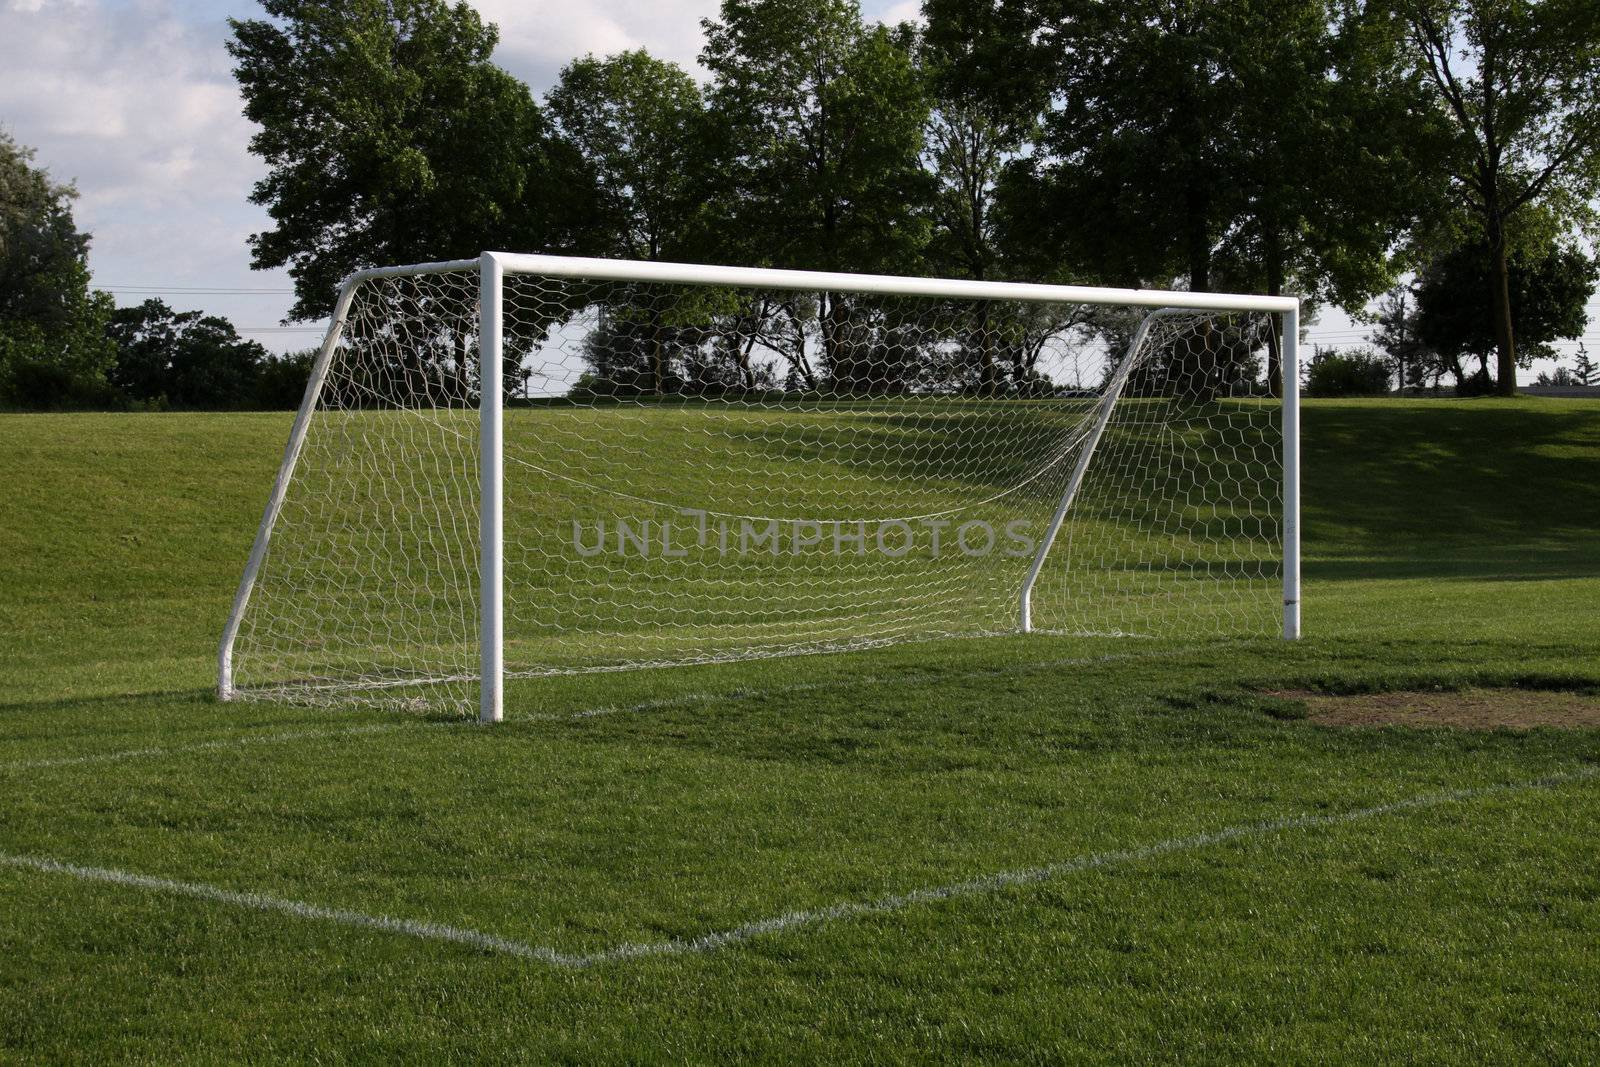 A view of a net on a vacant soccer pitch.
